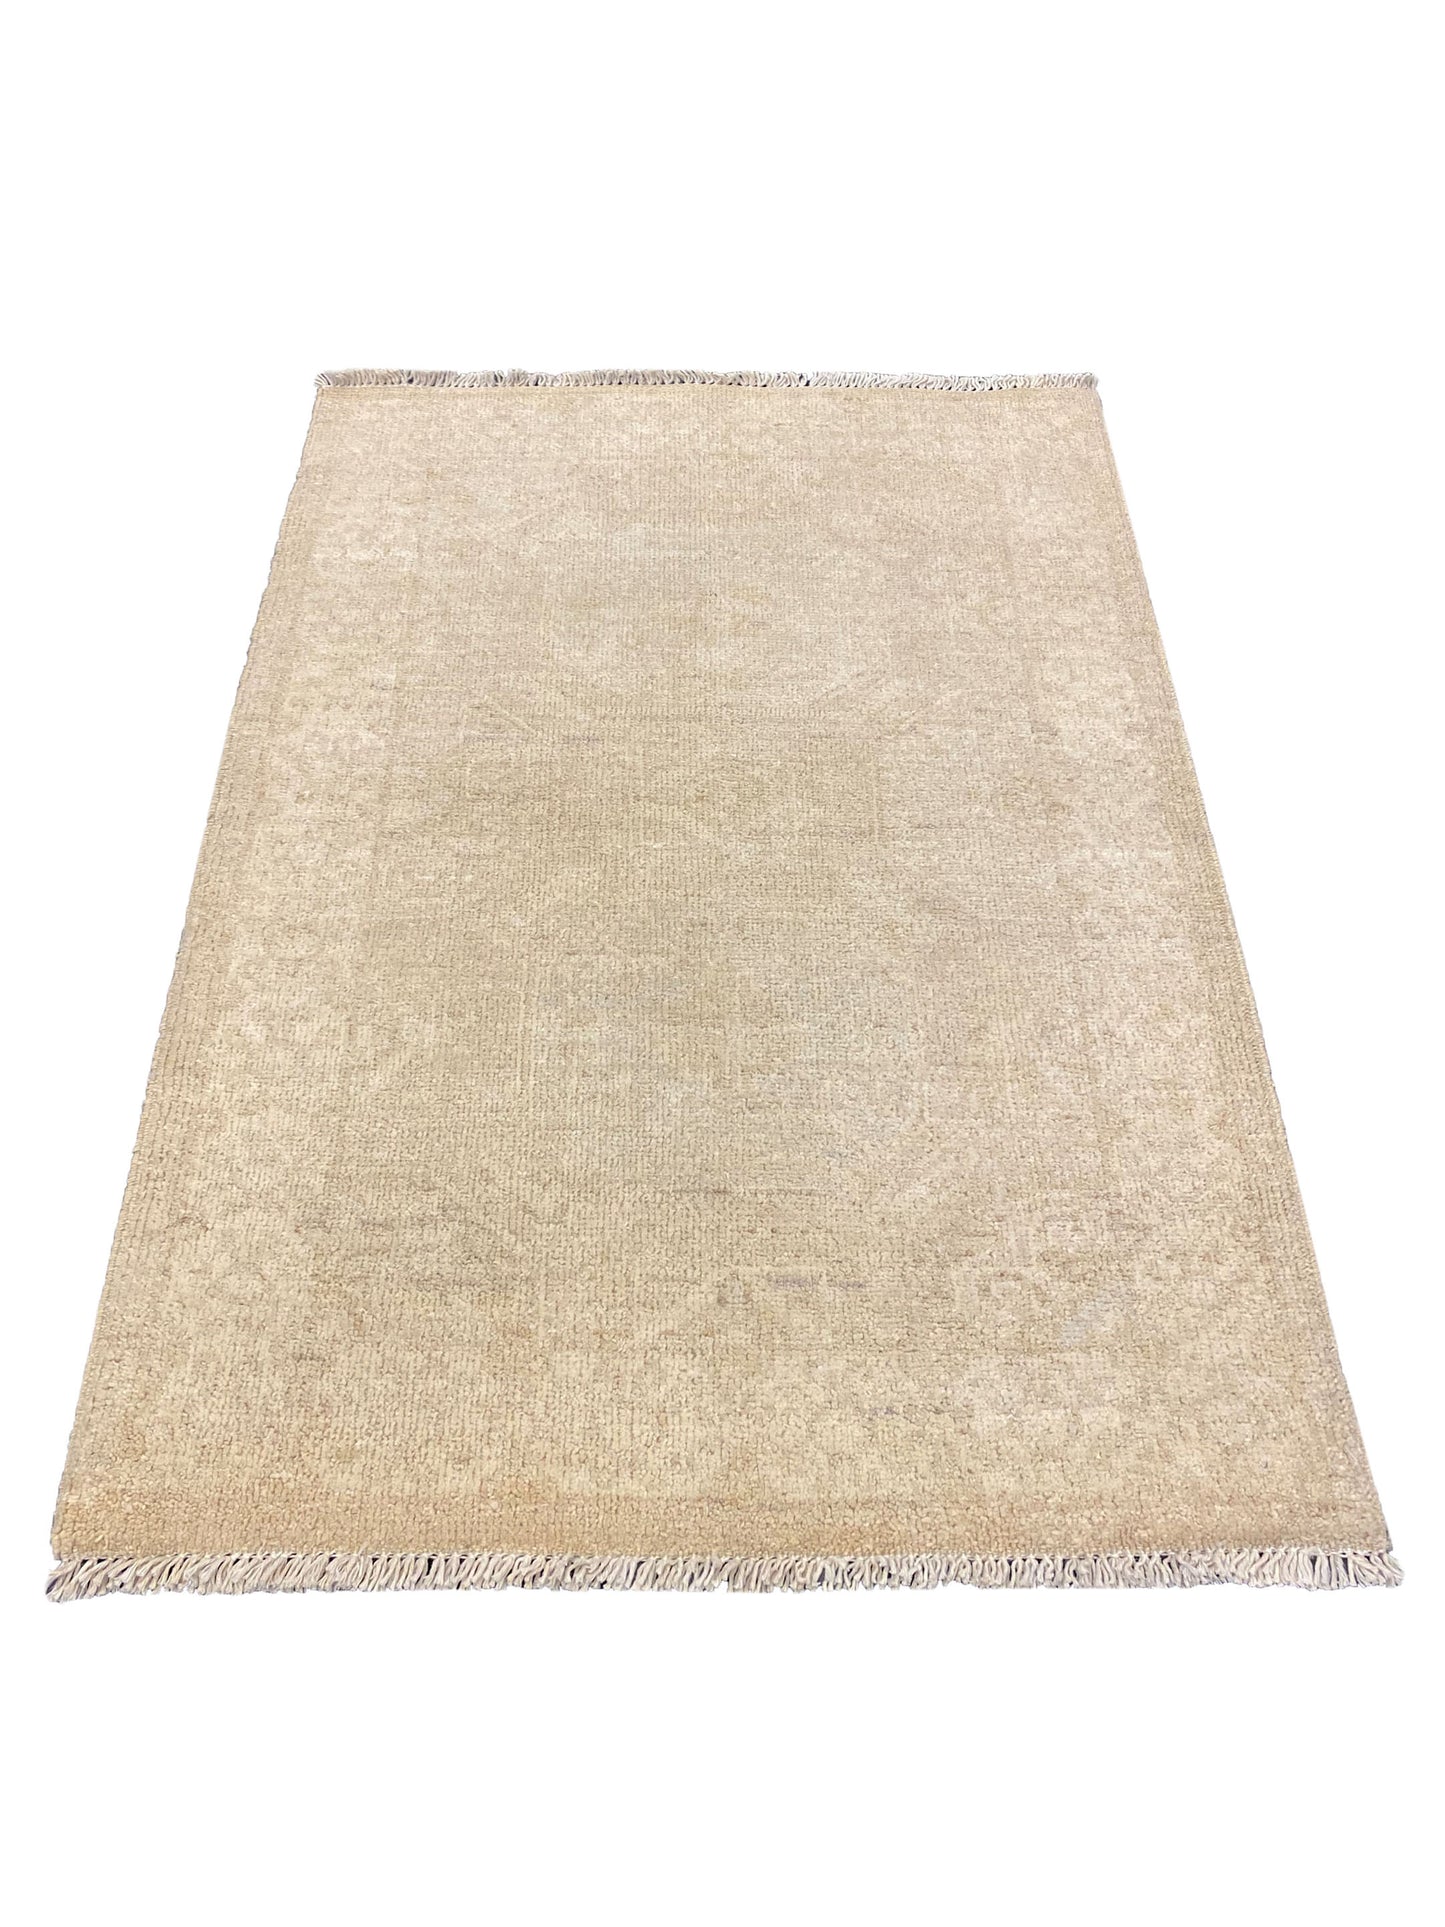 Artisan Patricia  Silver  Traditional Knotted Rug